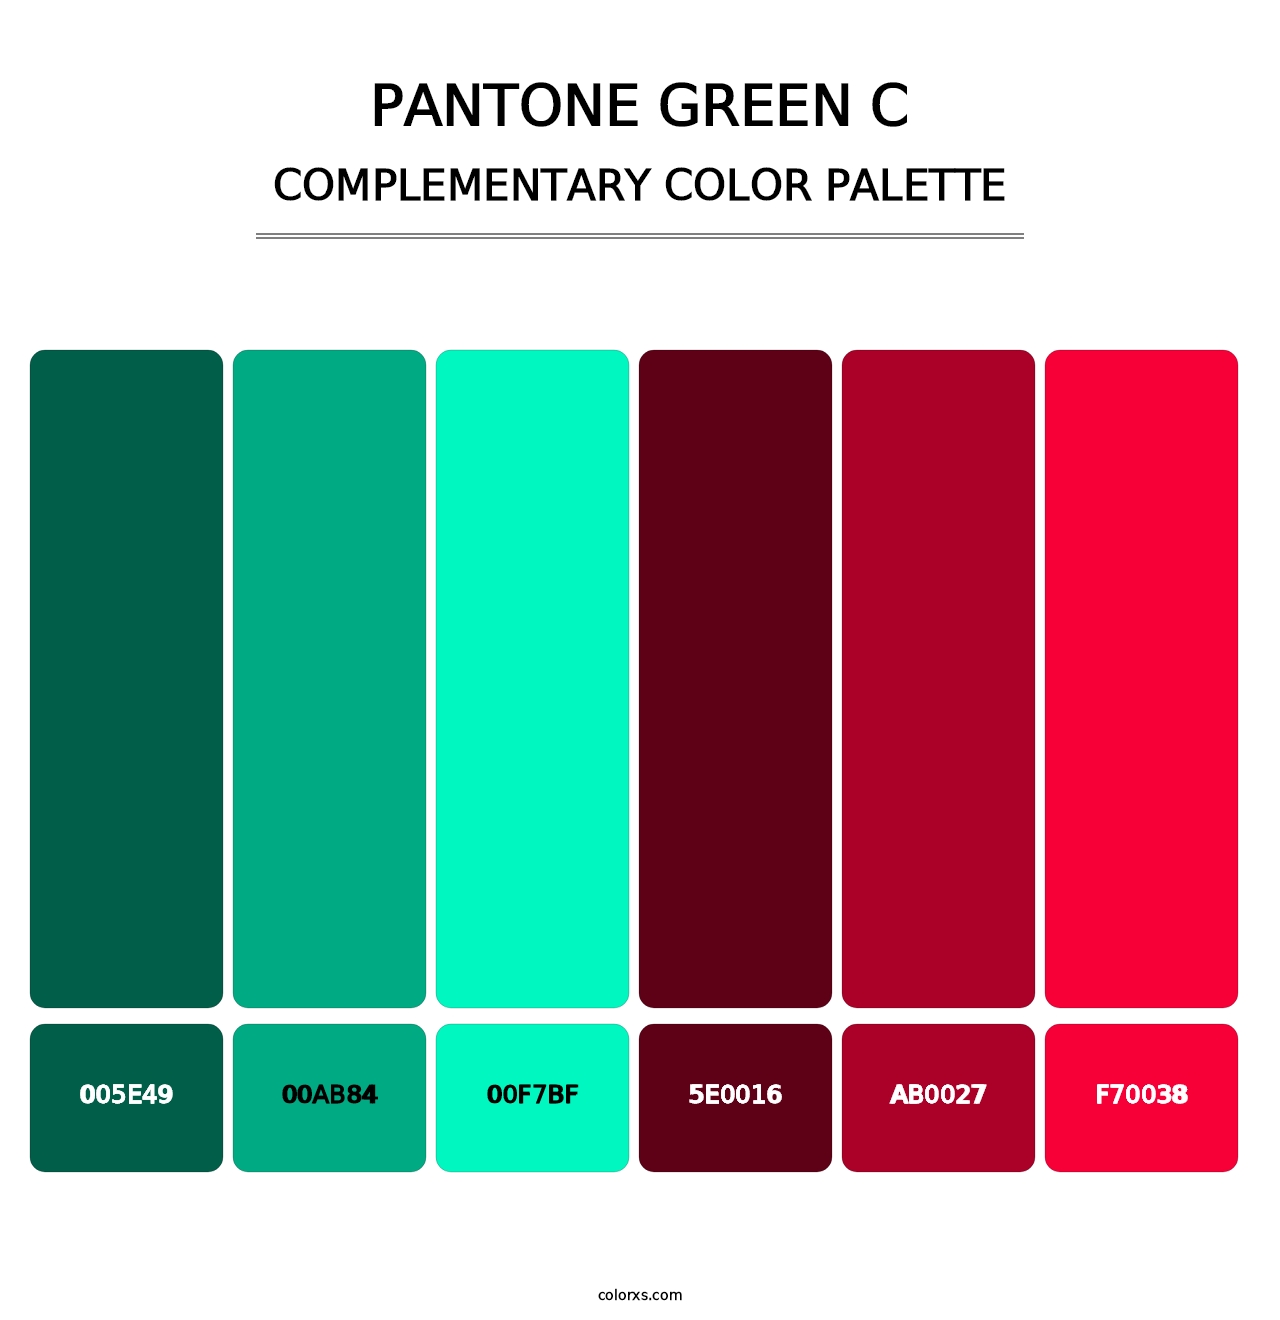 PANTONE Green C - Complementary Color Palette